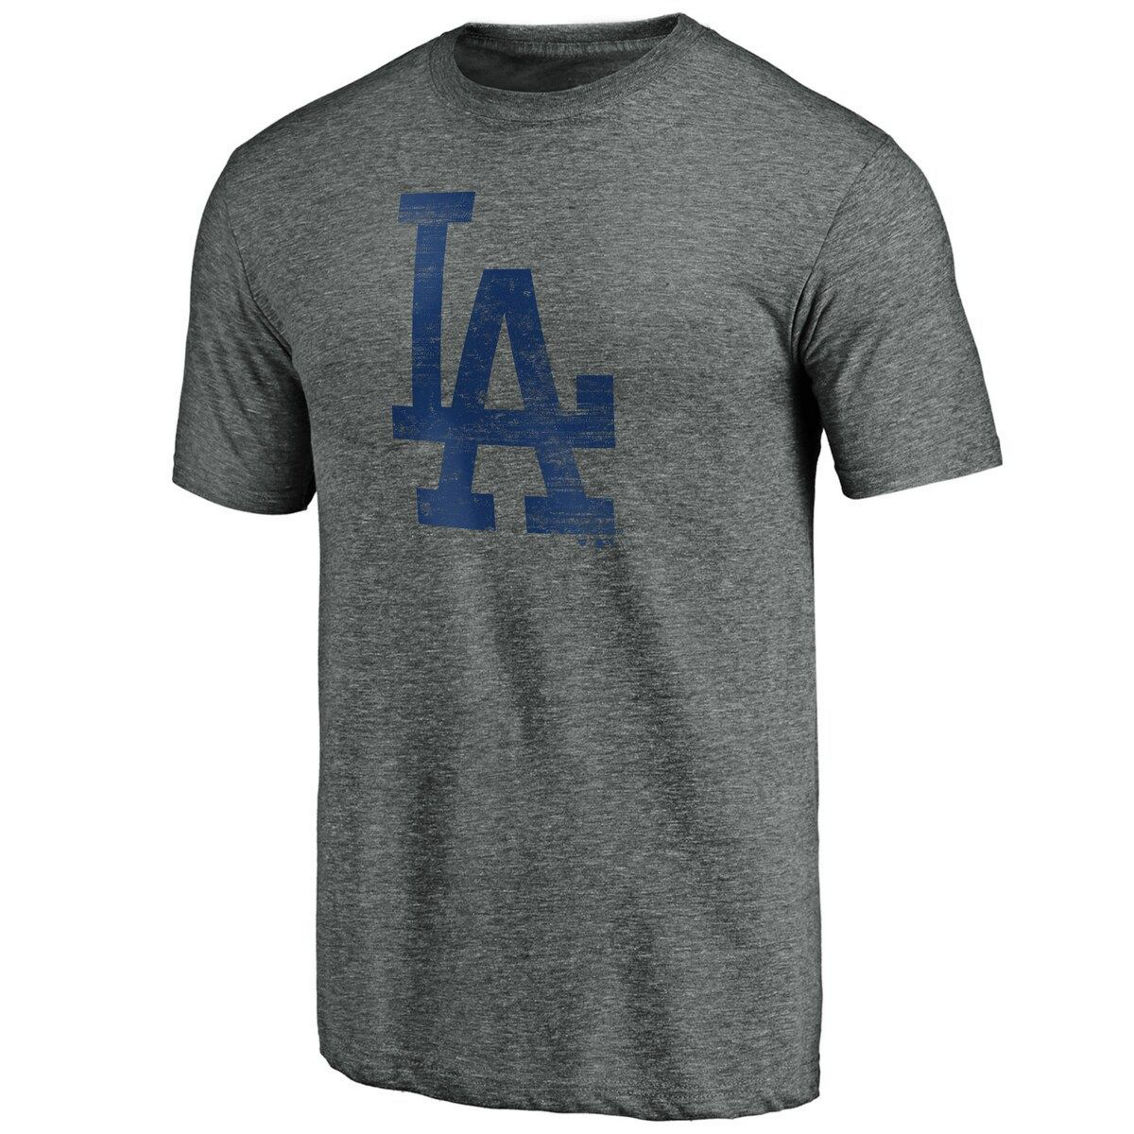 Fanatics Branded Men's Heathered Gray Los Angeles Dodgers Weathered Official Logo Tri-Blend T-Shirt - Image 3 of 4